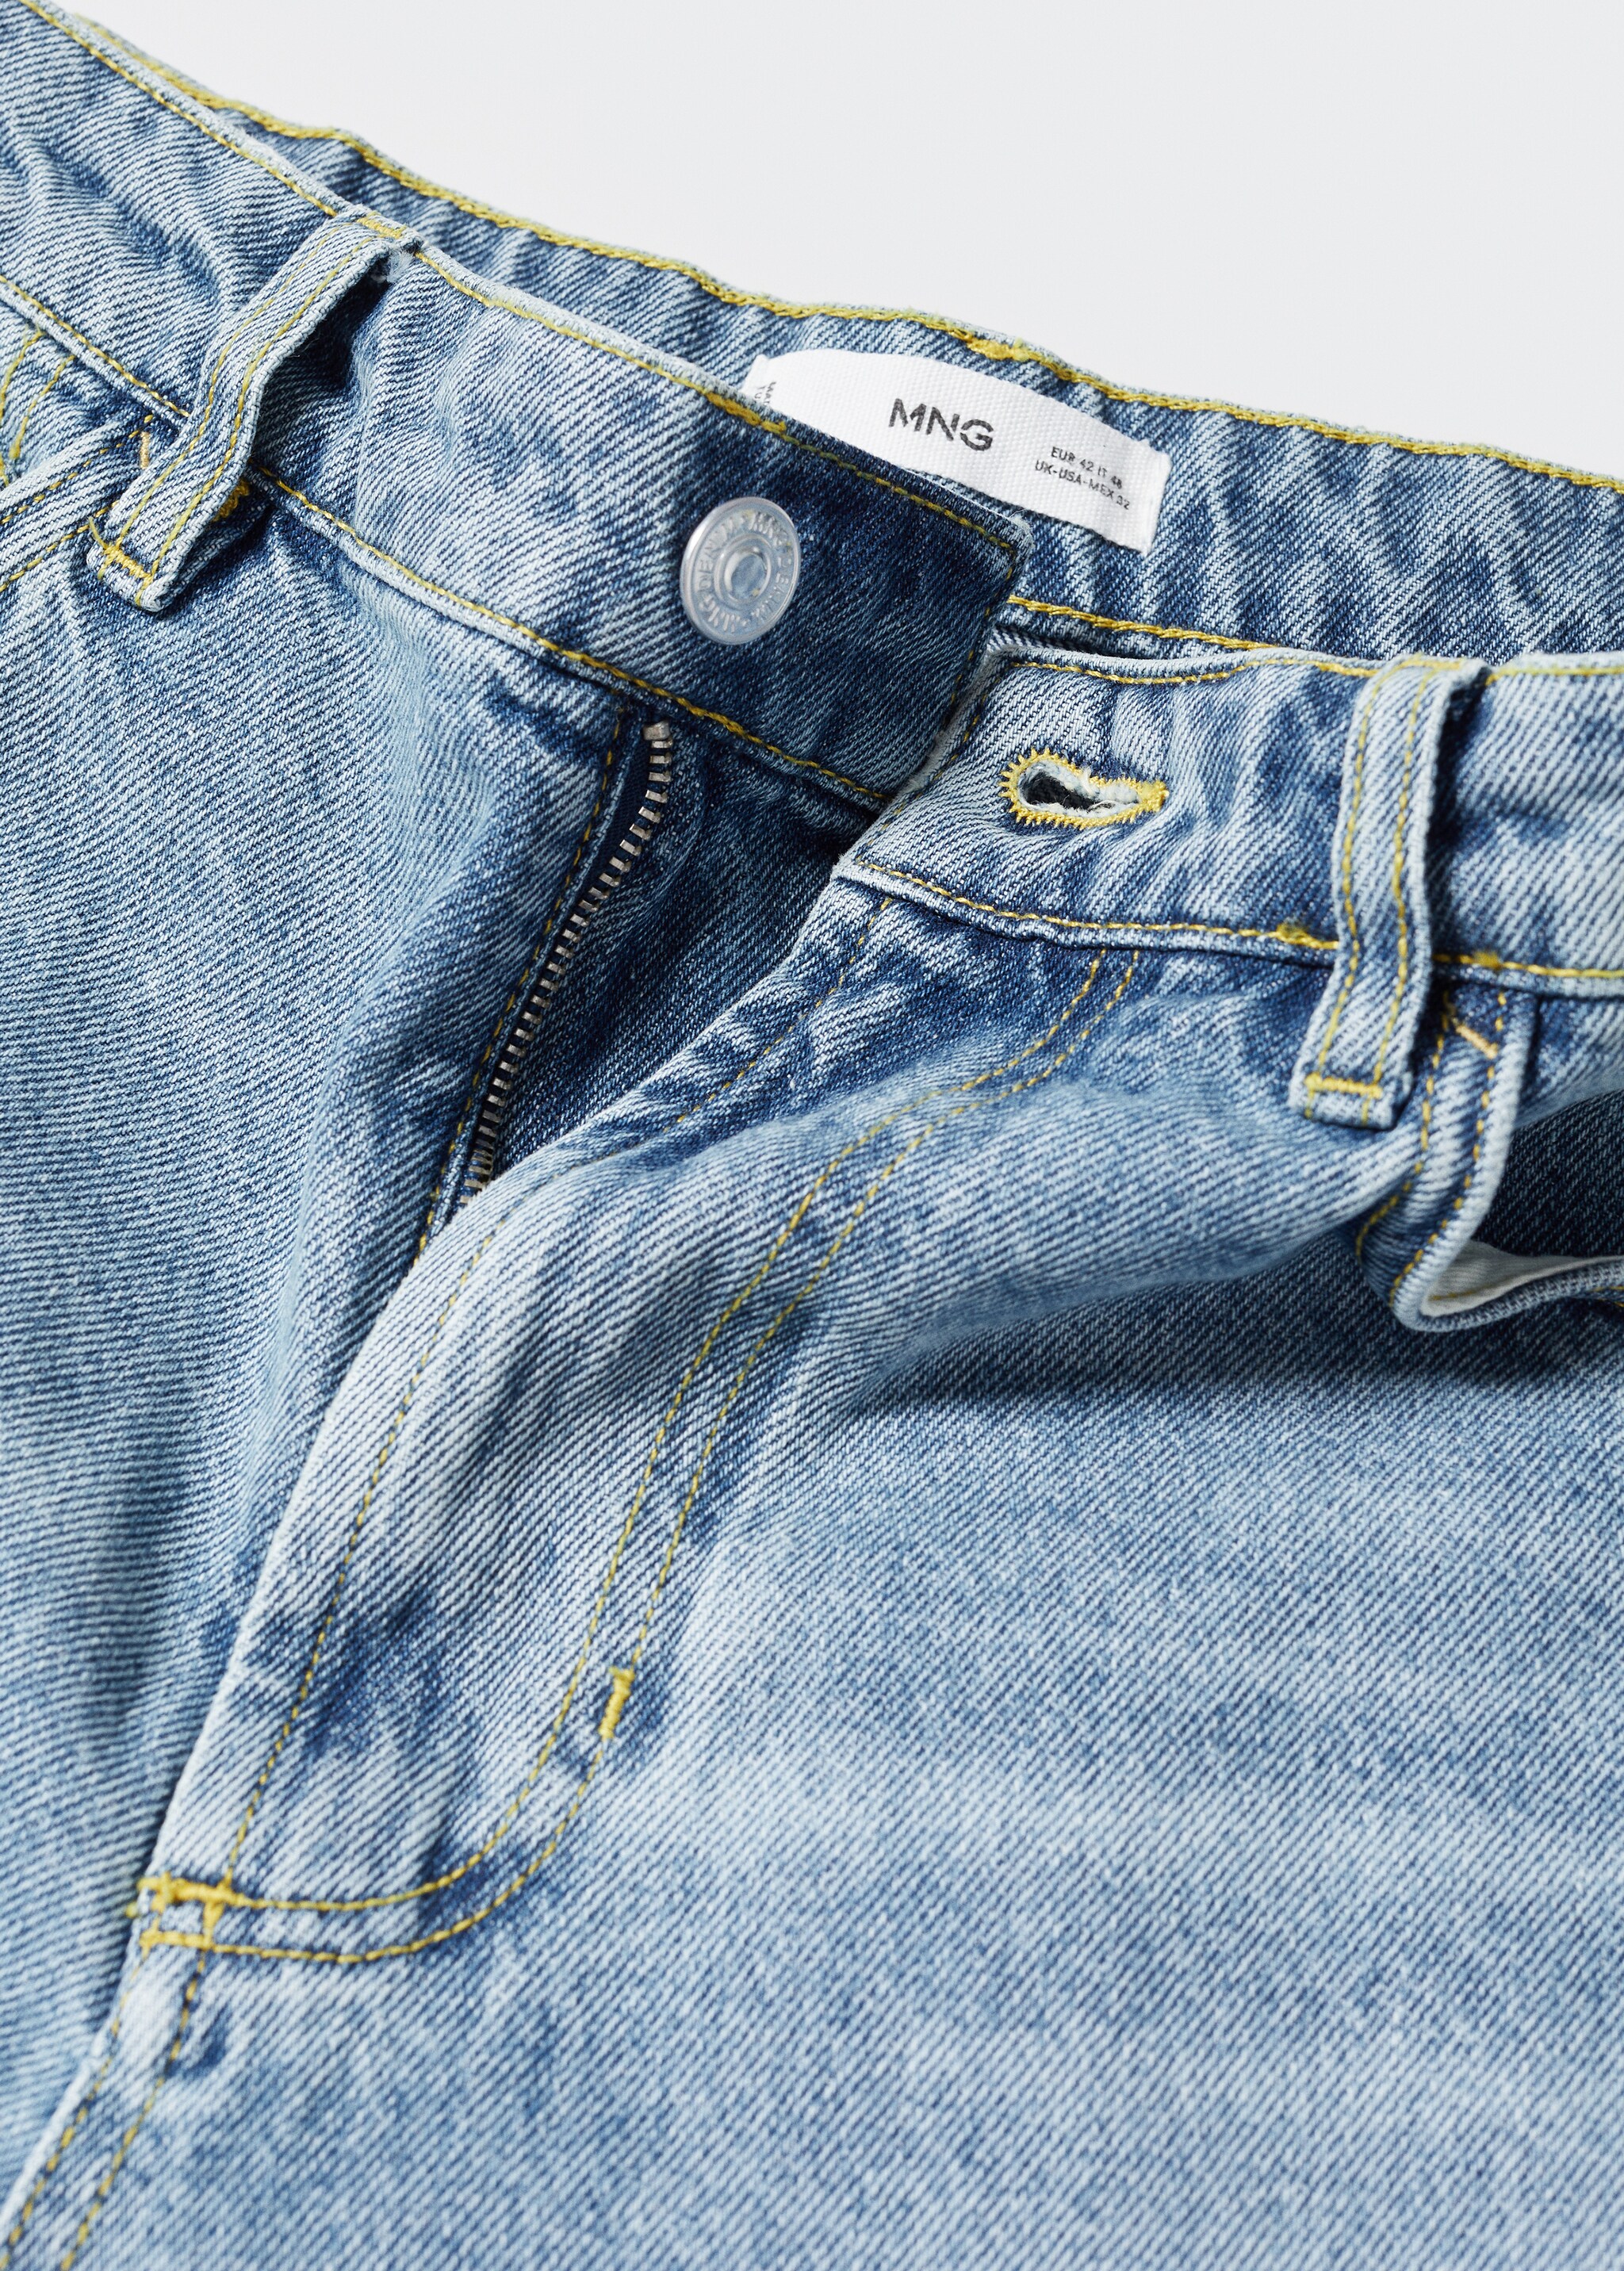 Tapered loose cropped jeans - Details of the article 8